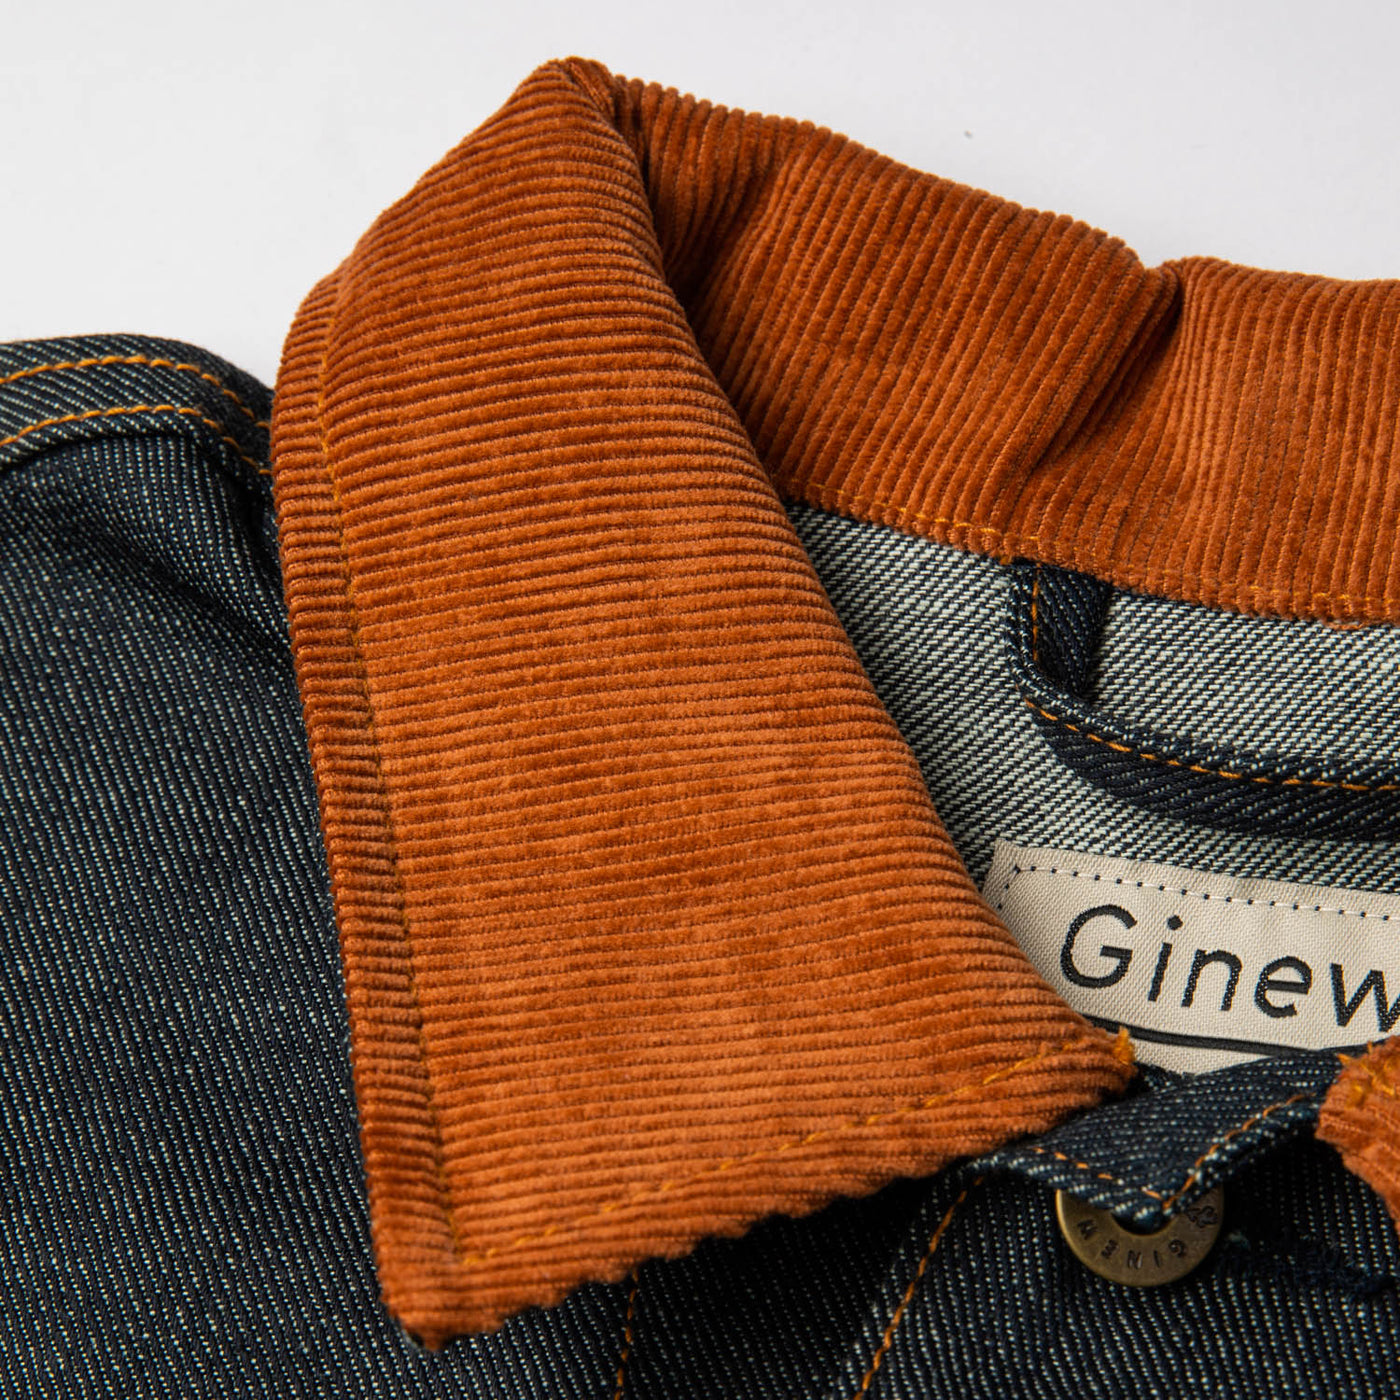  Close up of the Corduroy collar, top button and inside tag. Tag reads: "Ginew"